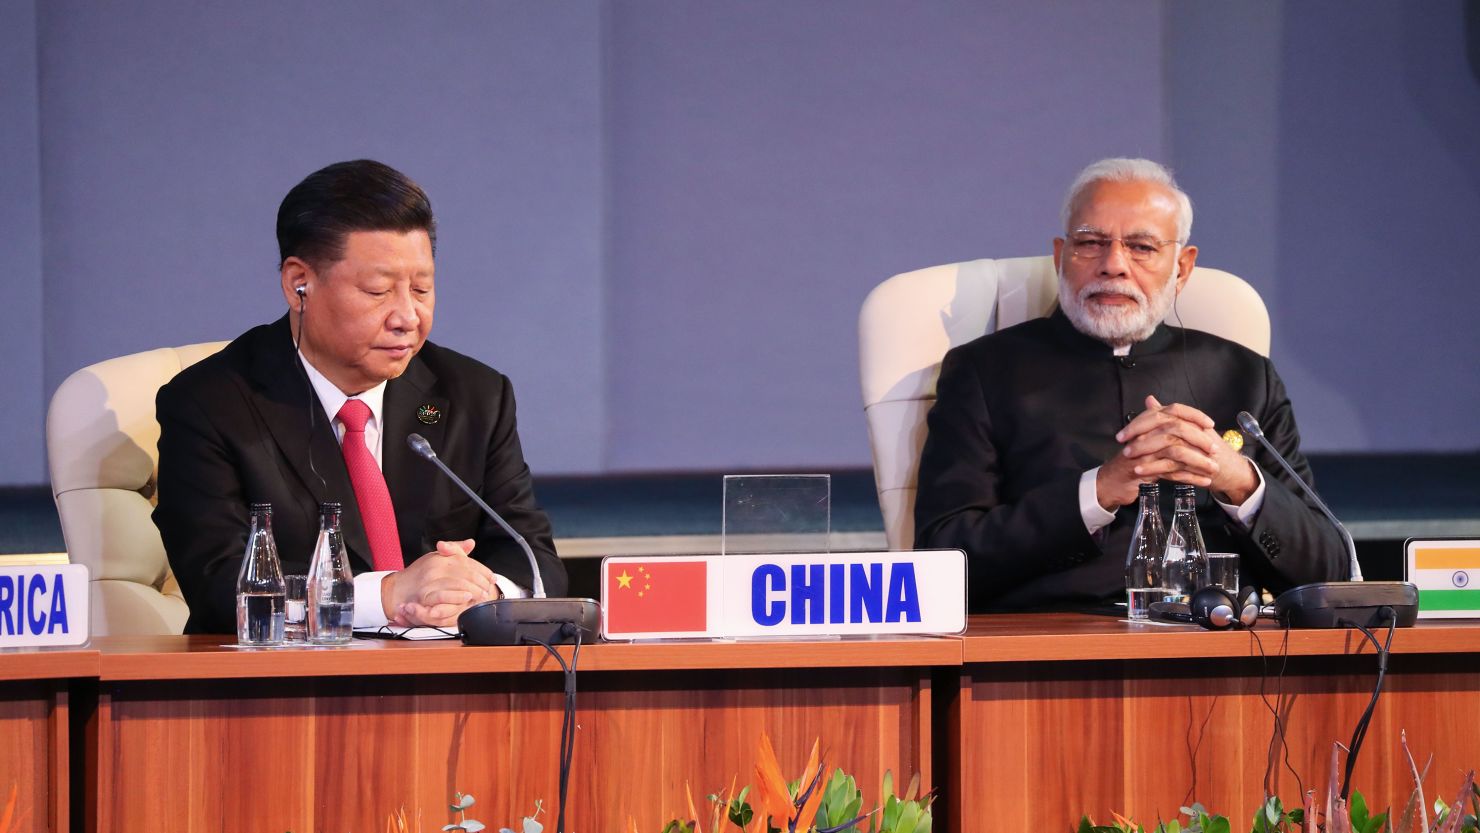 China's leader Xi Jinping and India's Prime Minister Narendra Modi attend the 10th BRICS summit on July 27, 2018, in Johannesburg, South Africa. 